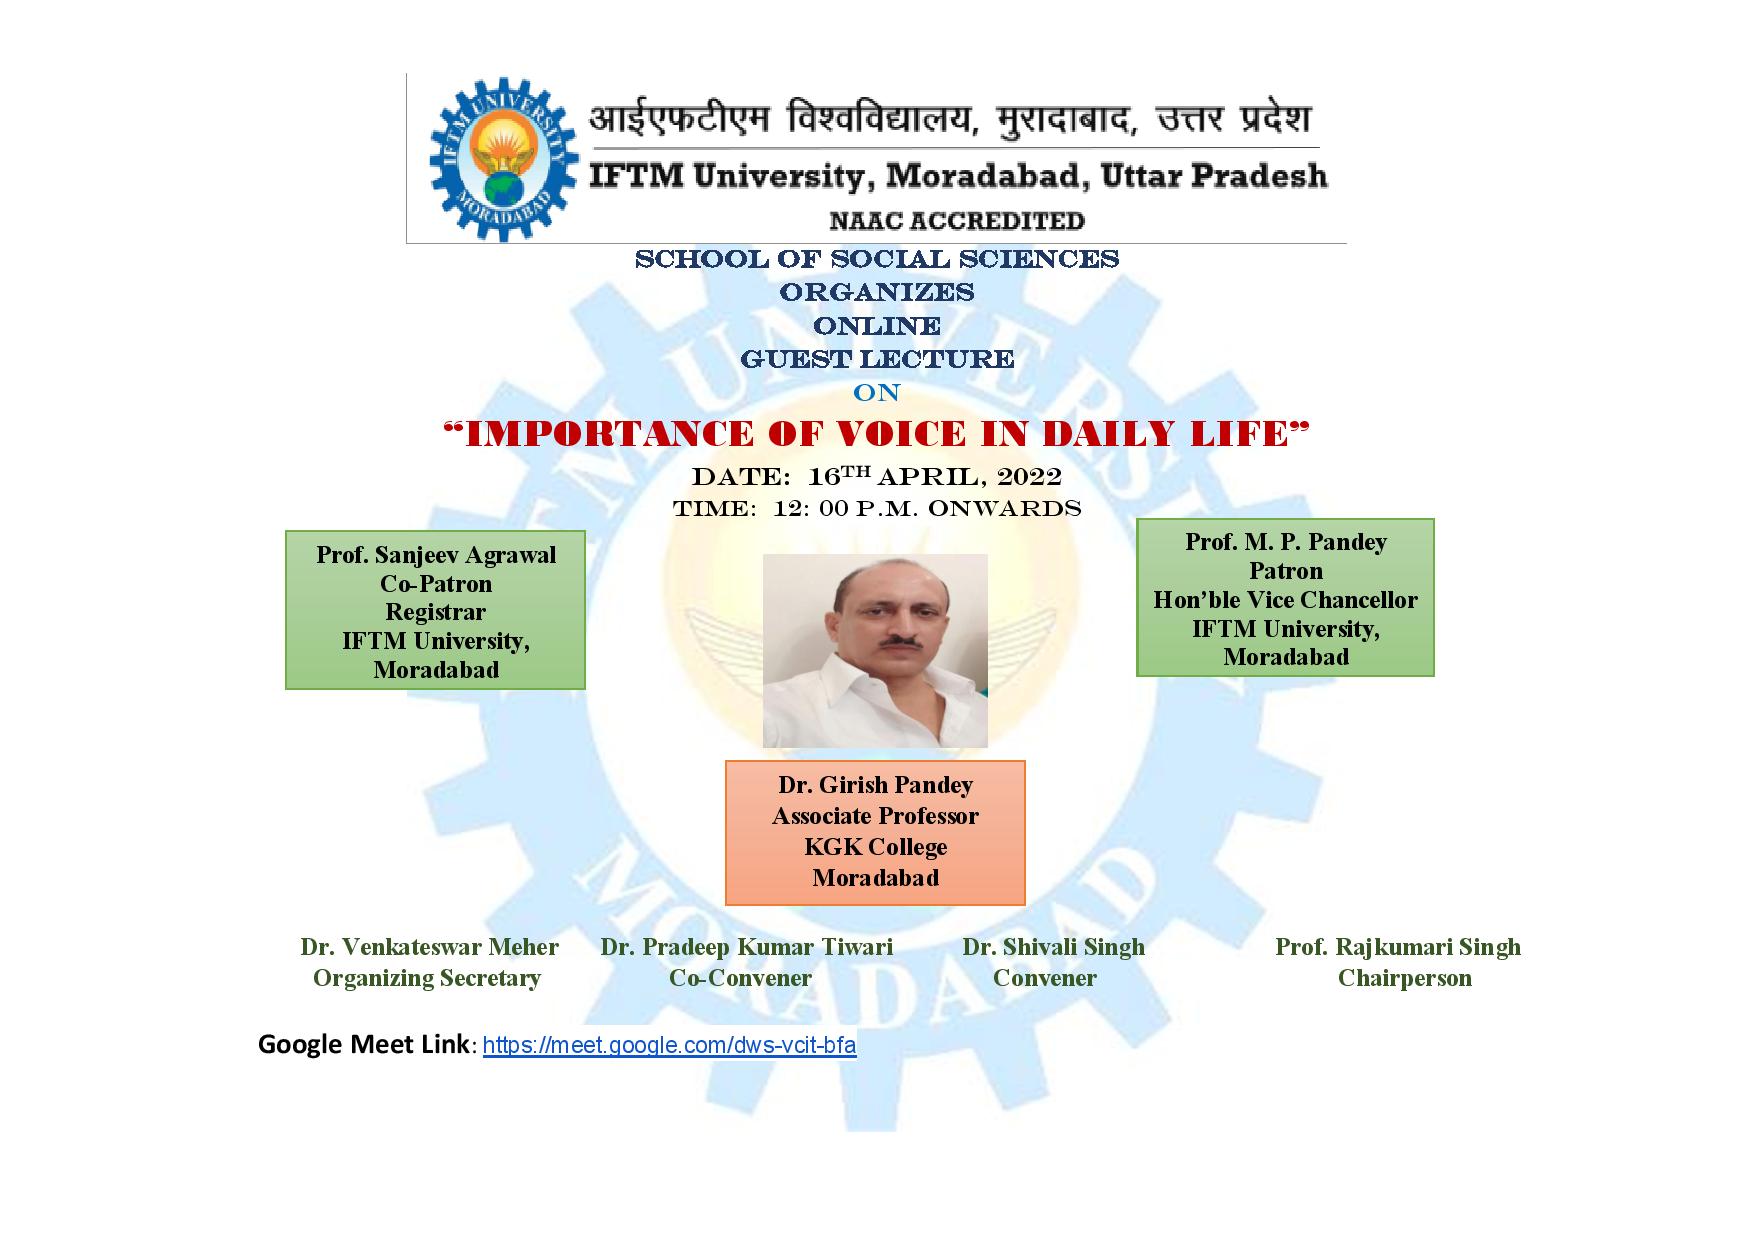 Guest Lecture on Importance of Voice in Daily Life